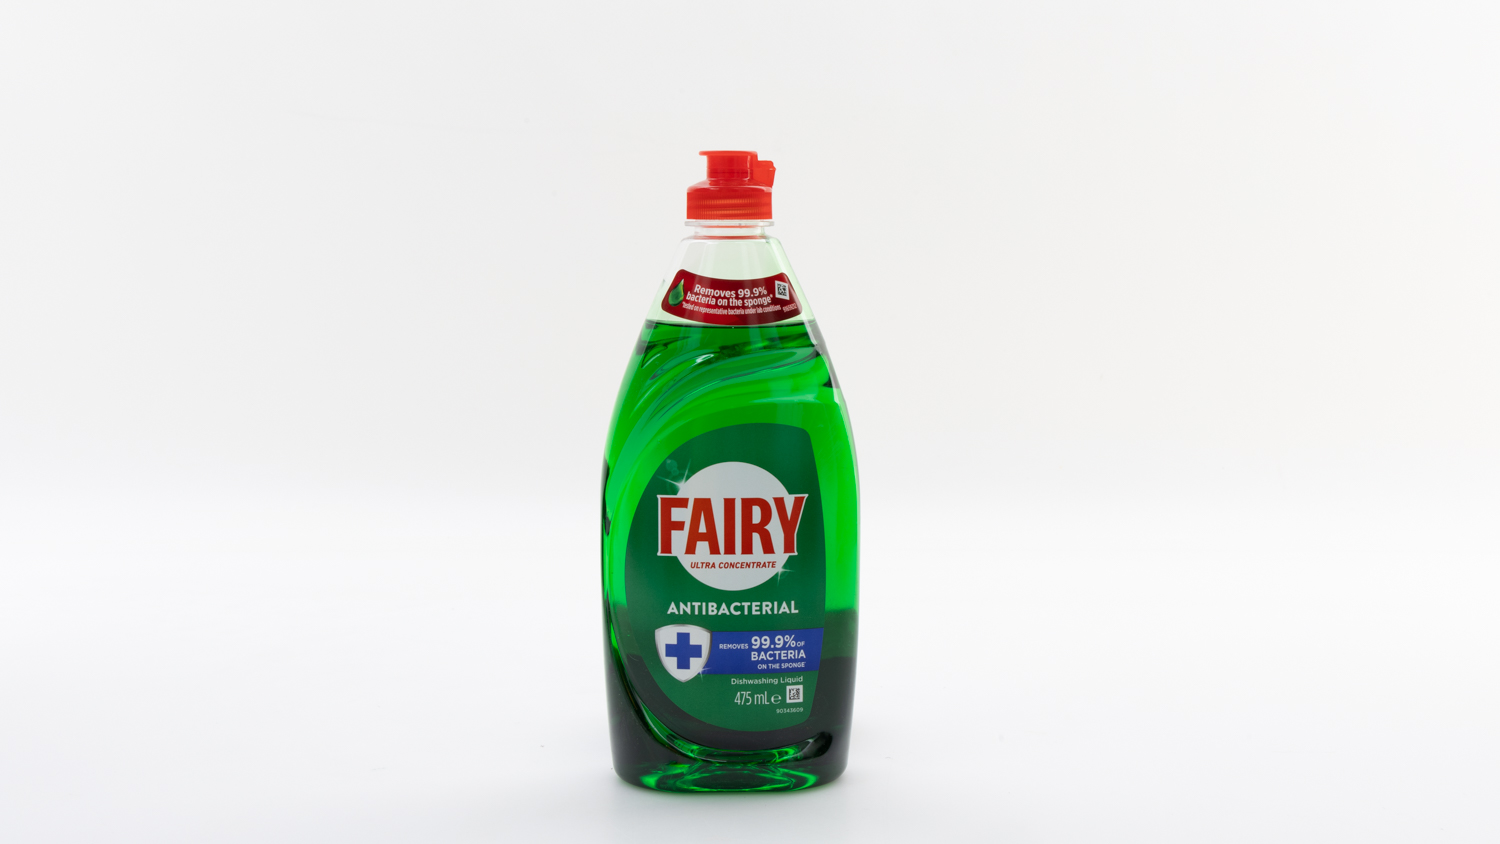 Fairy Ultra Concentrate Antibacterial Dishwashing Liquid carousel image